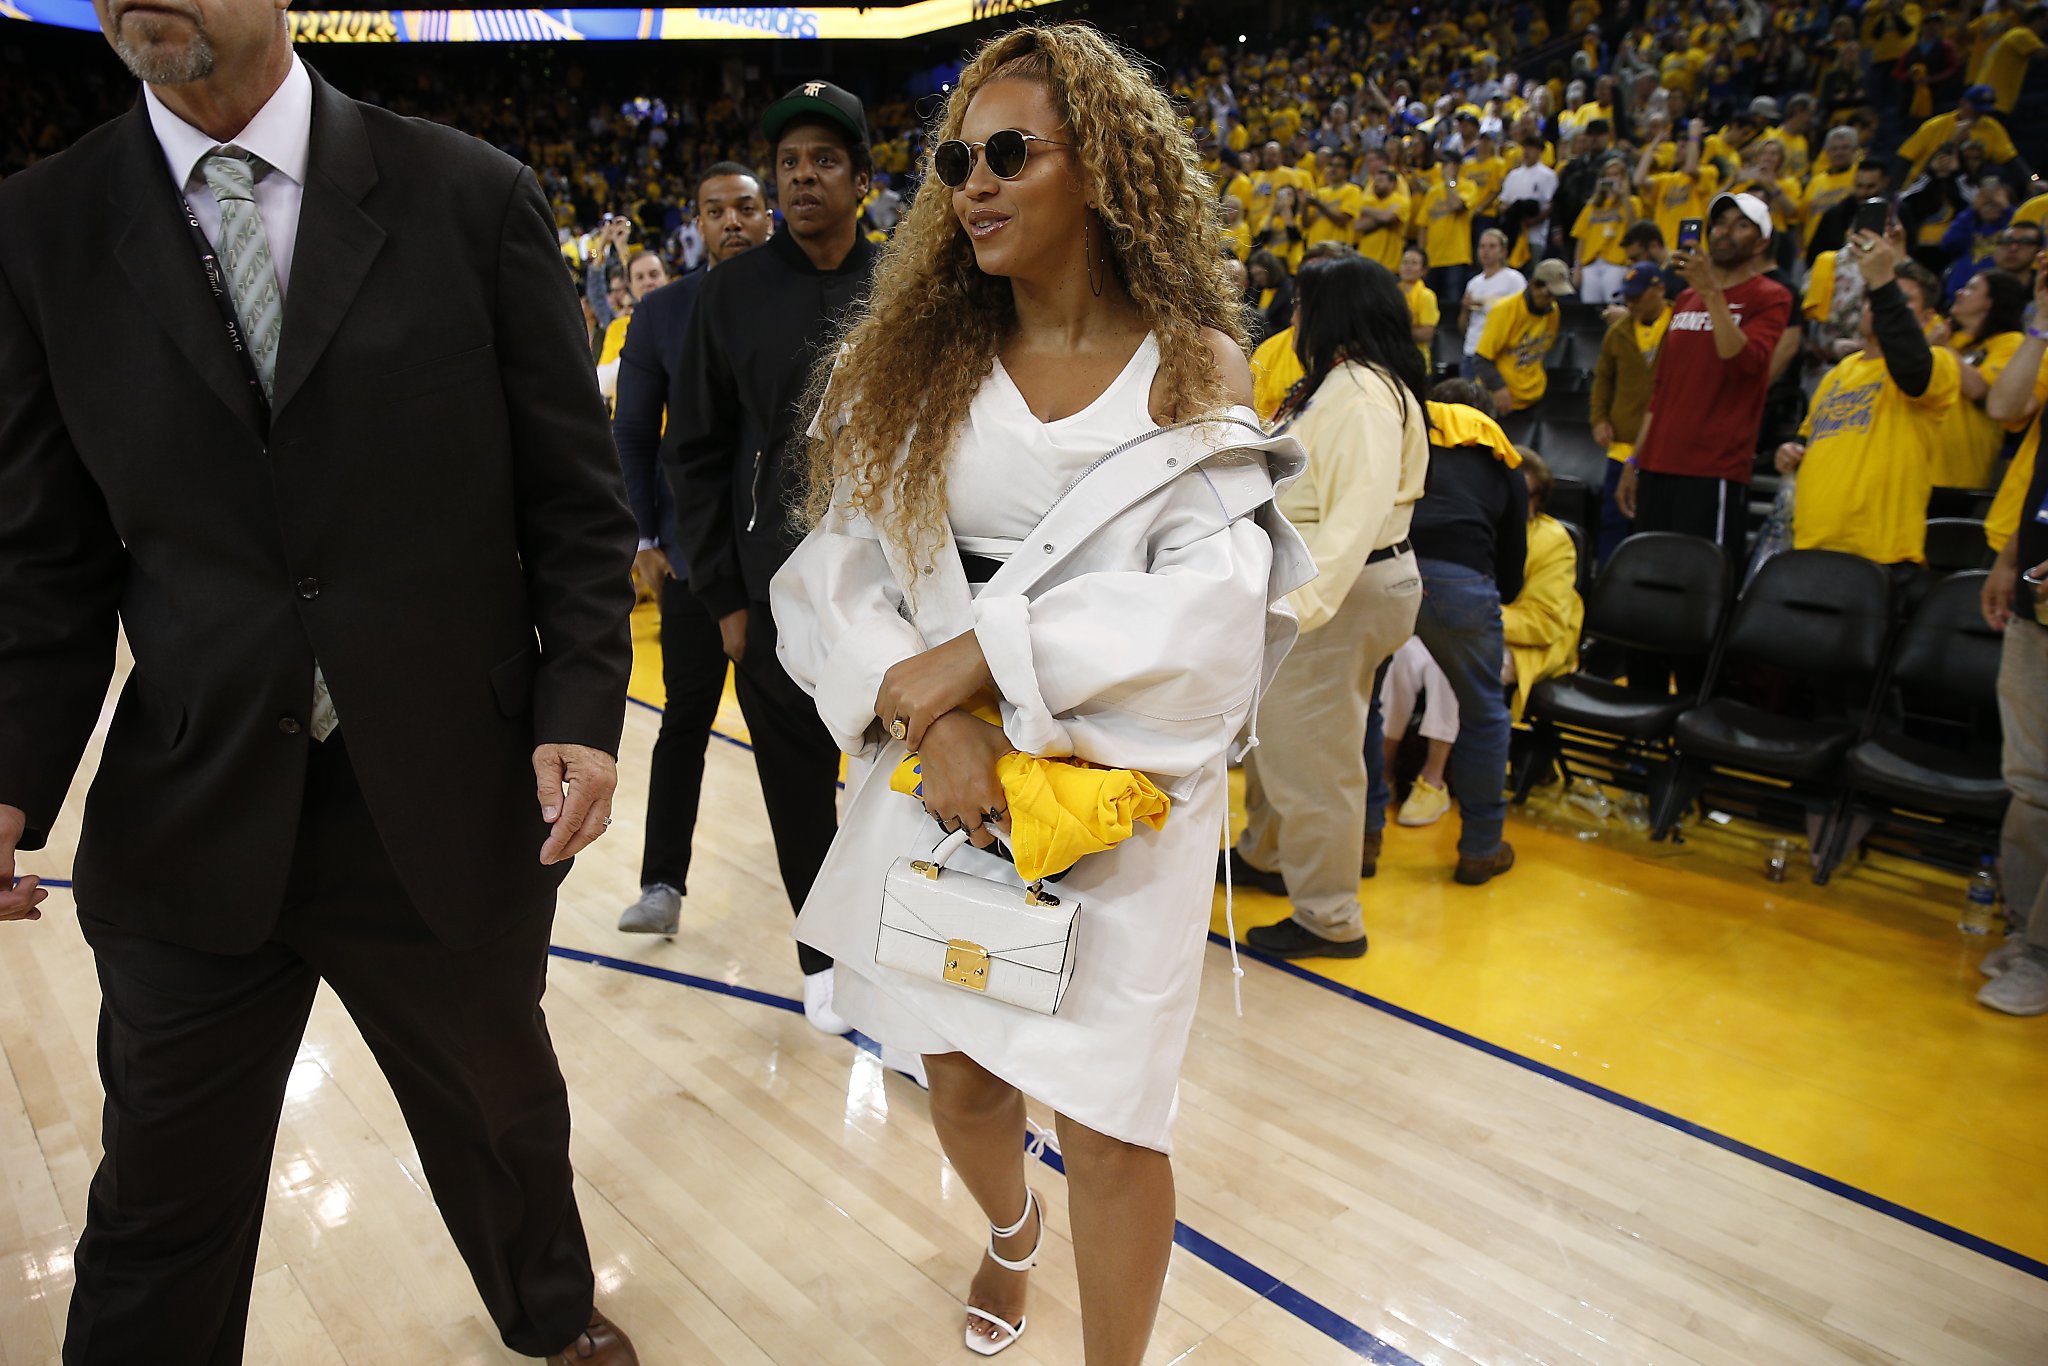 Beyonce surprises on the sideline of Warriors game - SFGate2048 x 1366